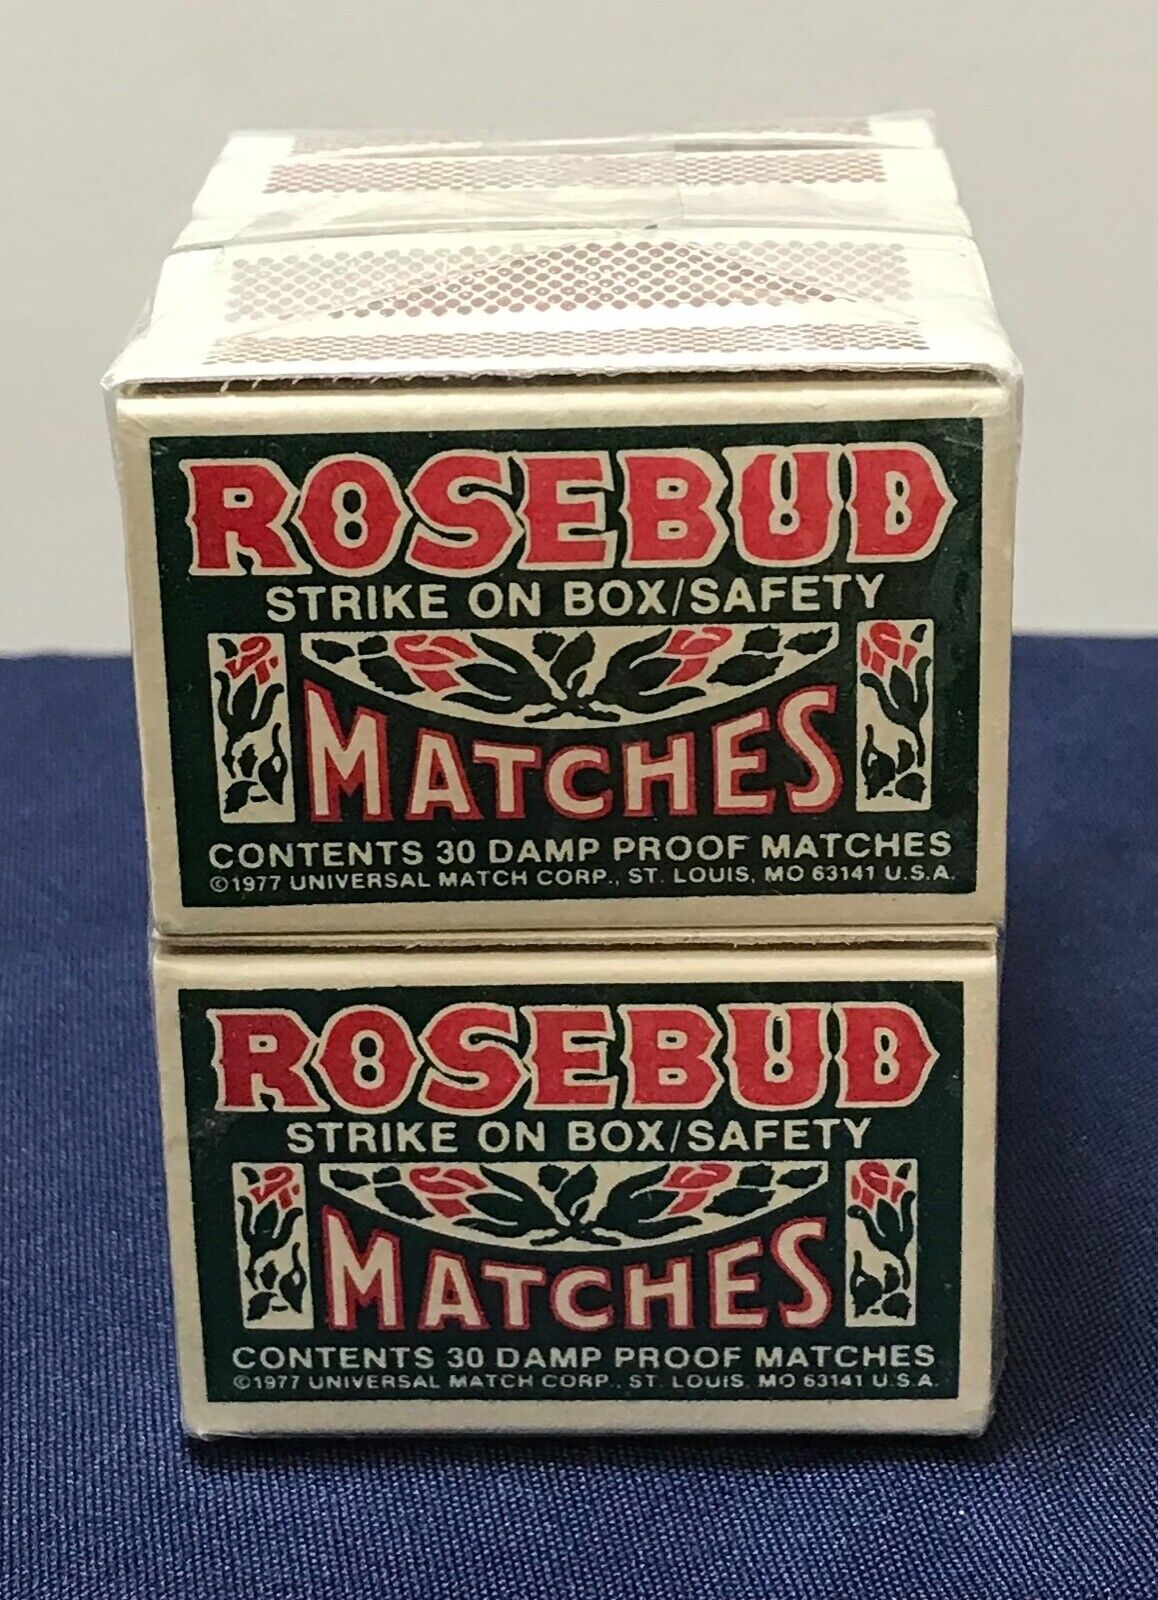 Vintage 1970s Rosebud Matches, Collectible, Unopened and Unused, Pack of 10